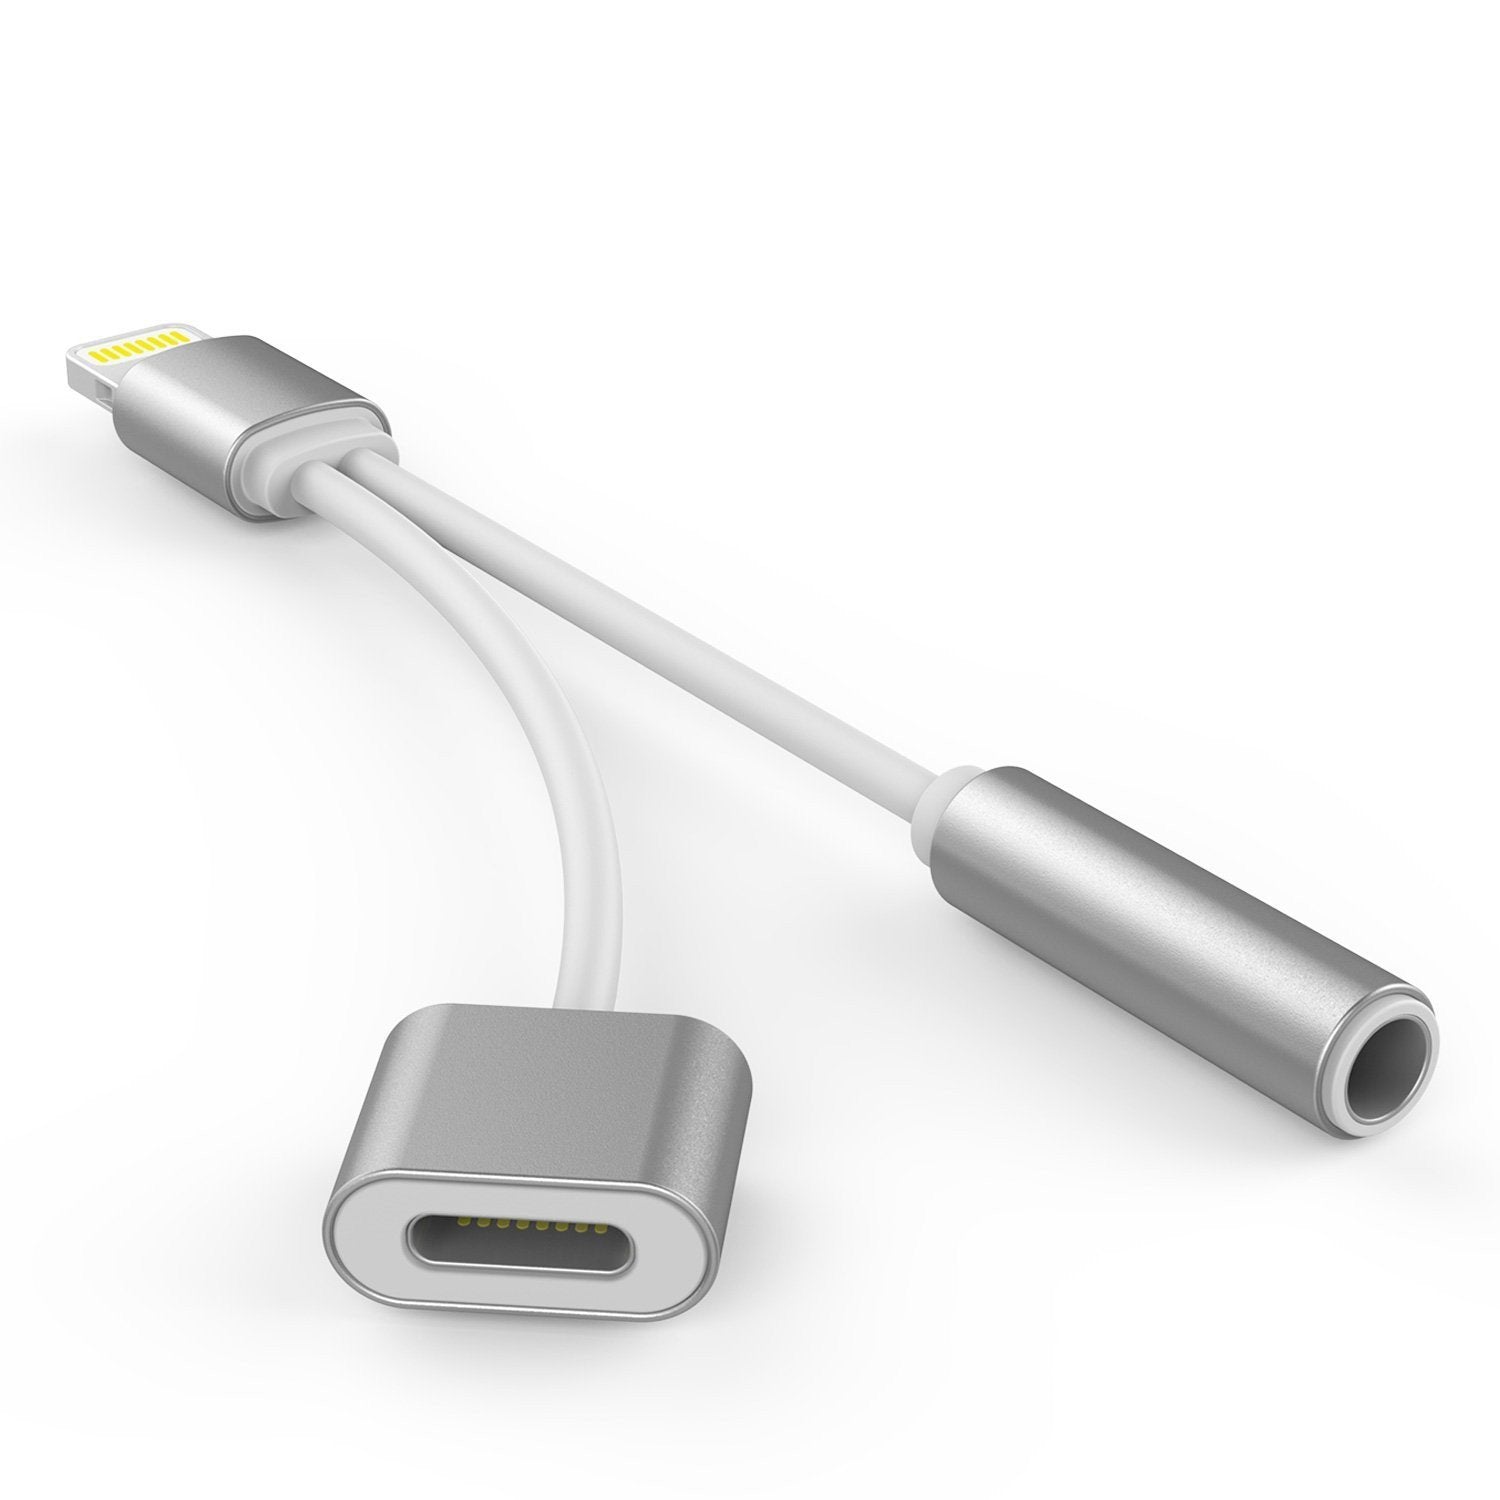 PUNKZAP Lightning Adapter Cable 2 in 1 Splitter Charger [SILVER]